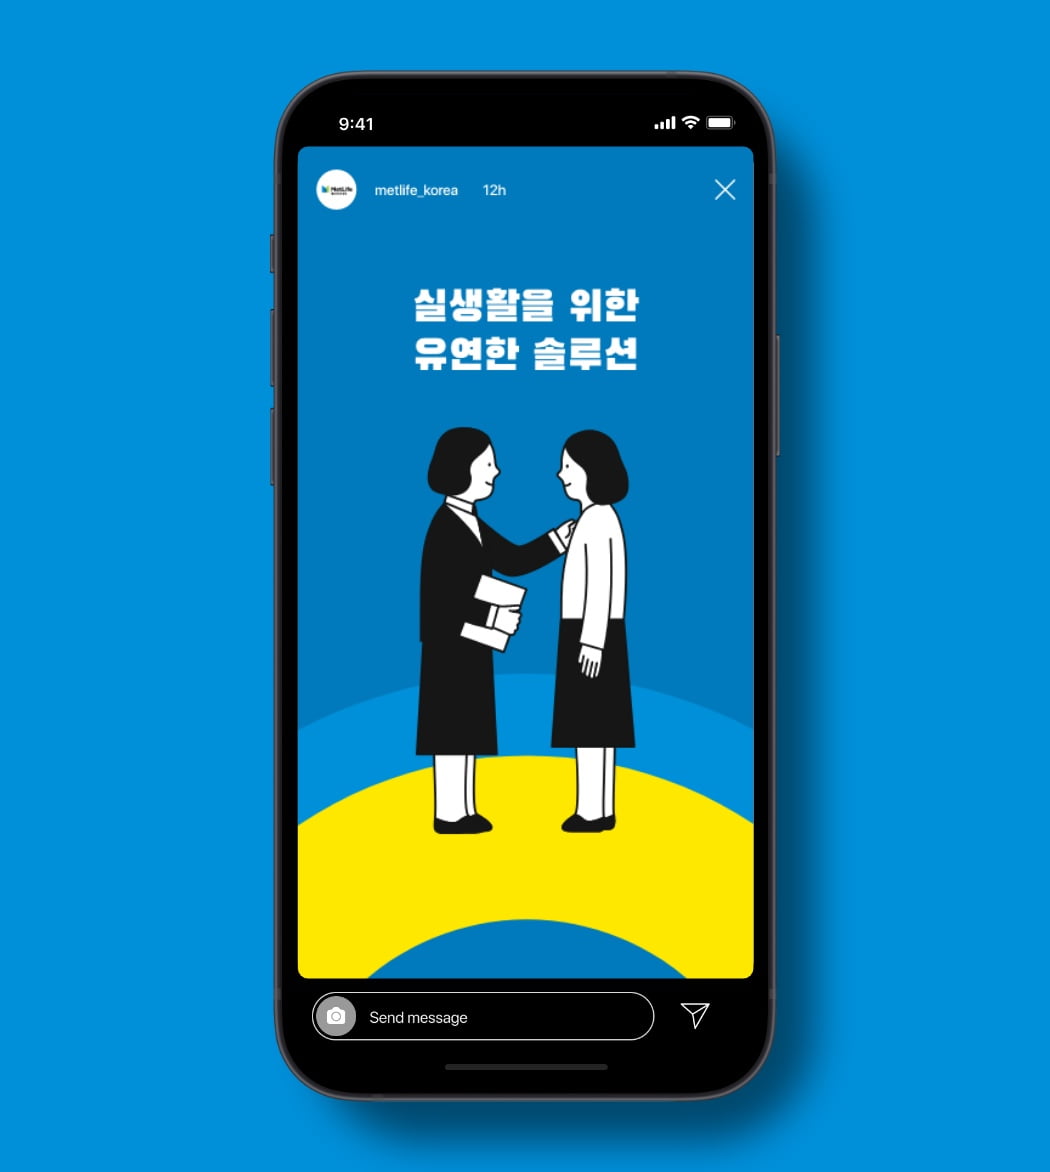 Phone screen showing branded communication with illustration and type in Instagram story.